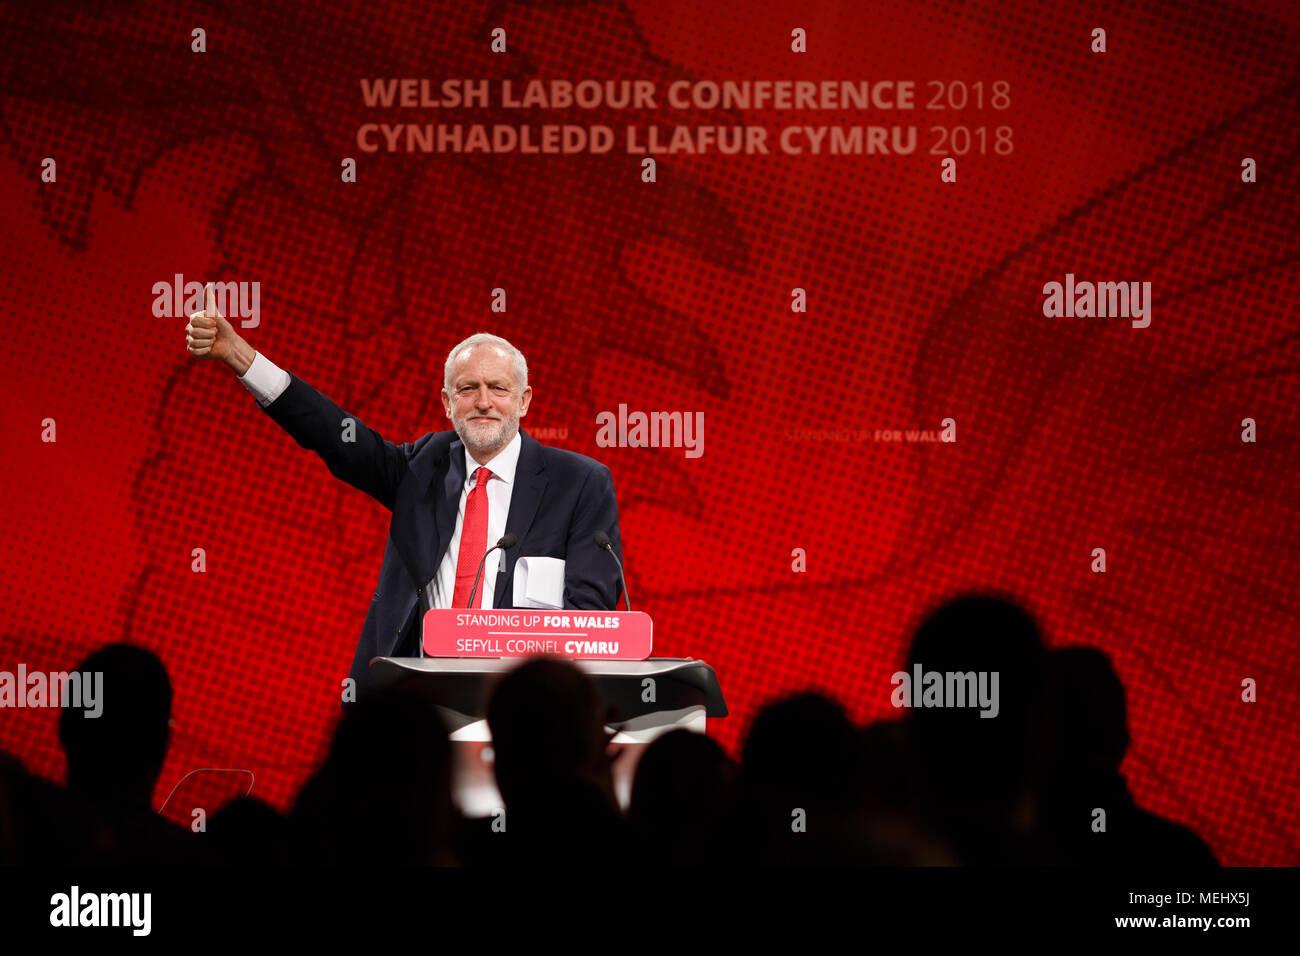 Welsh Labour Conference, Llandudno, UK, 22 April 2018. Jeremy Corbyn - Leader of Labour Party Speech to conference. Credit: Sean Pursey/Alamy Live News Stock Photo